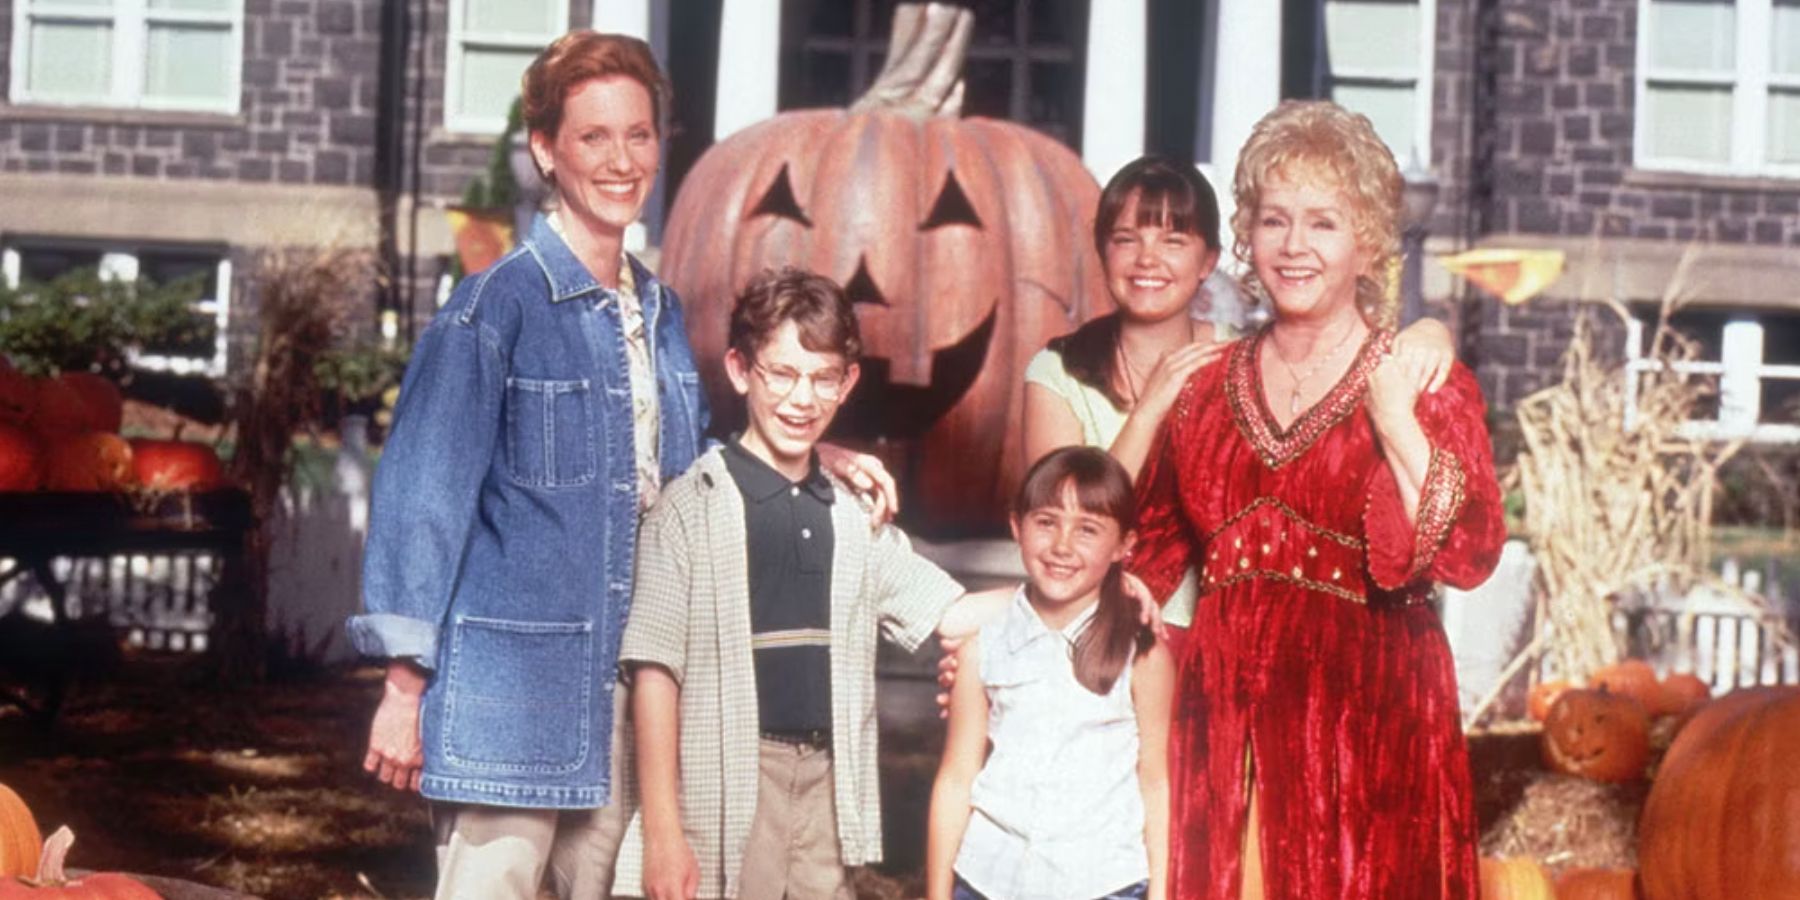 The Cromwell Piper family in front of a pumpkin patch in Halloweentown